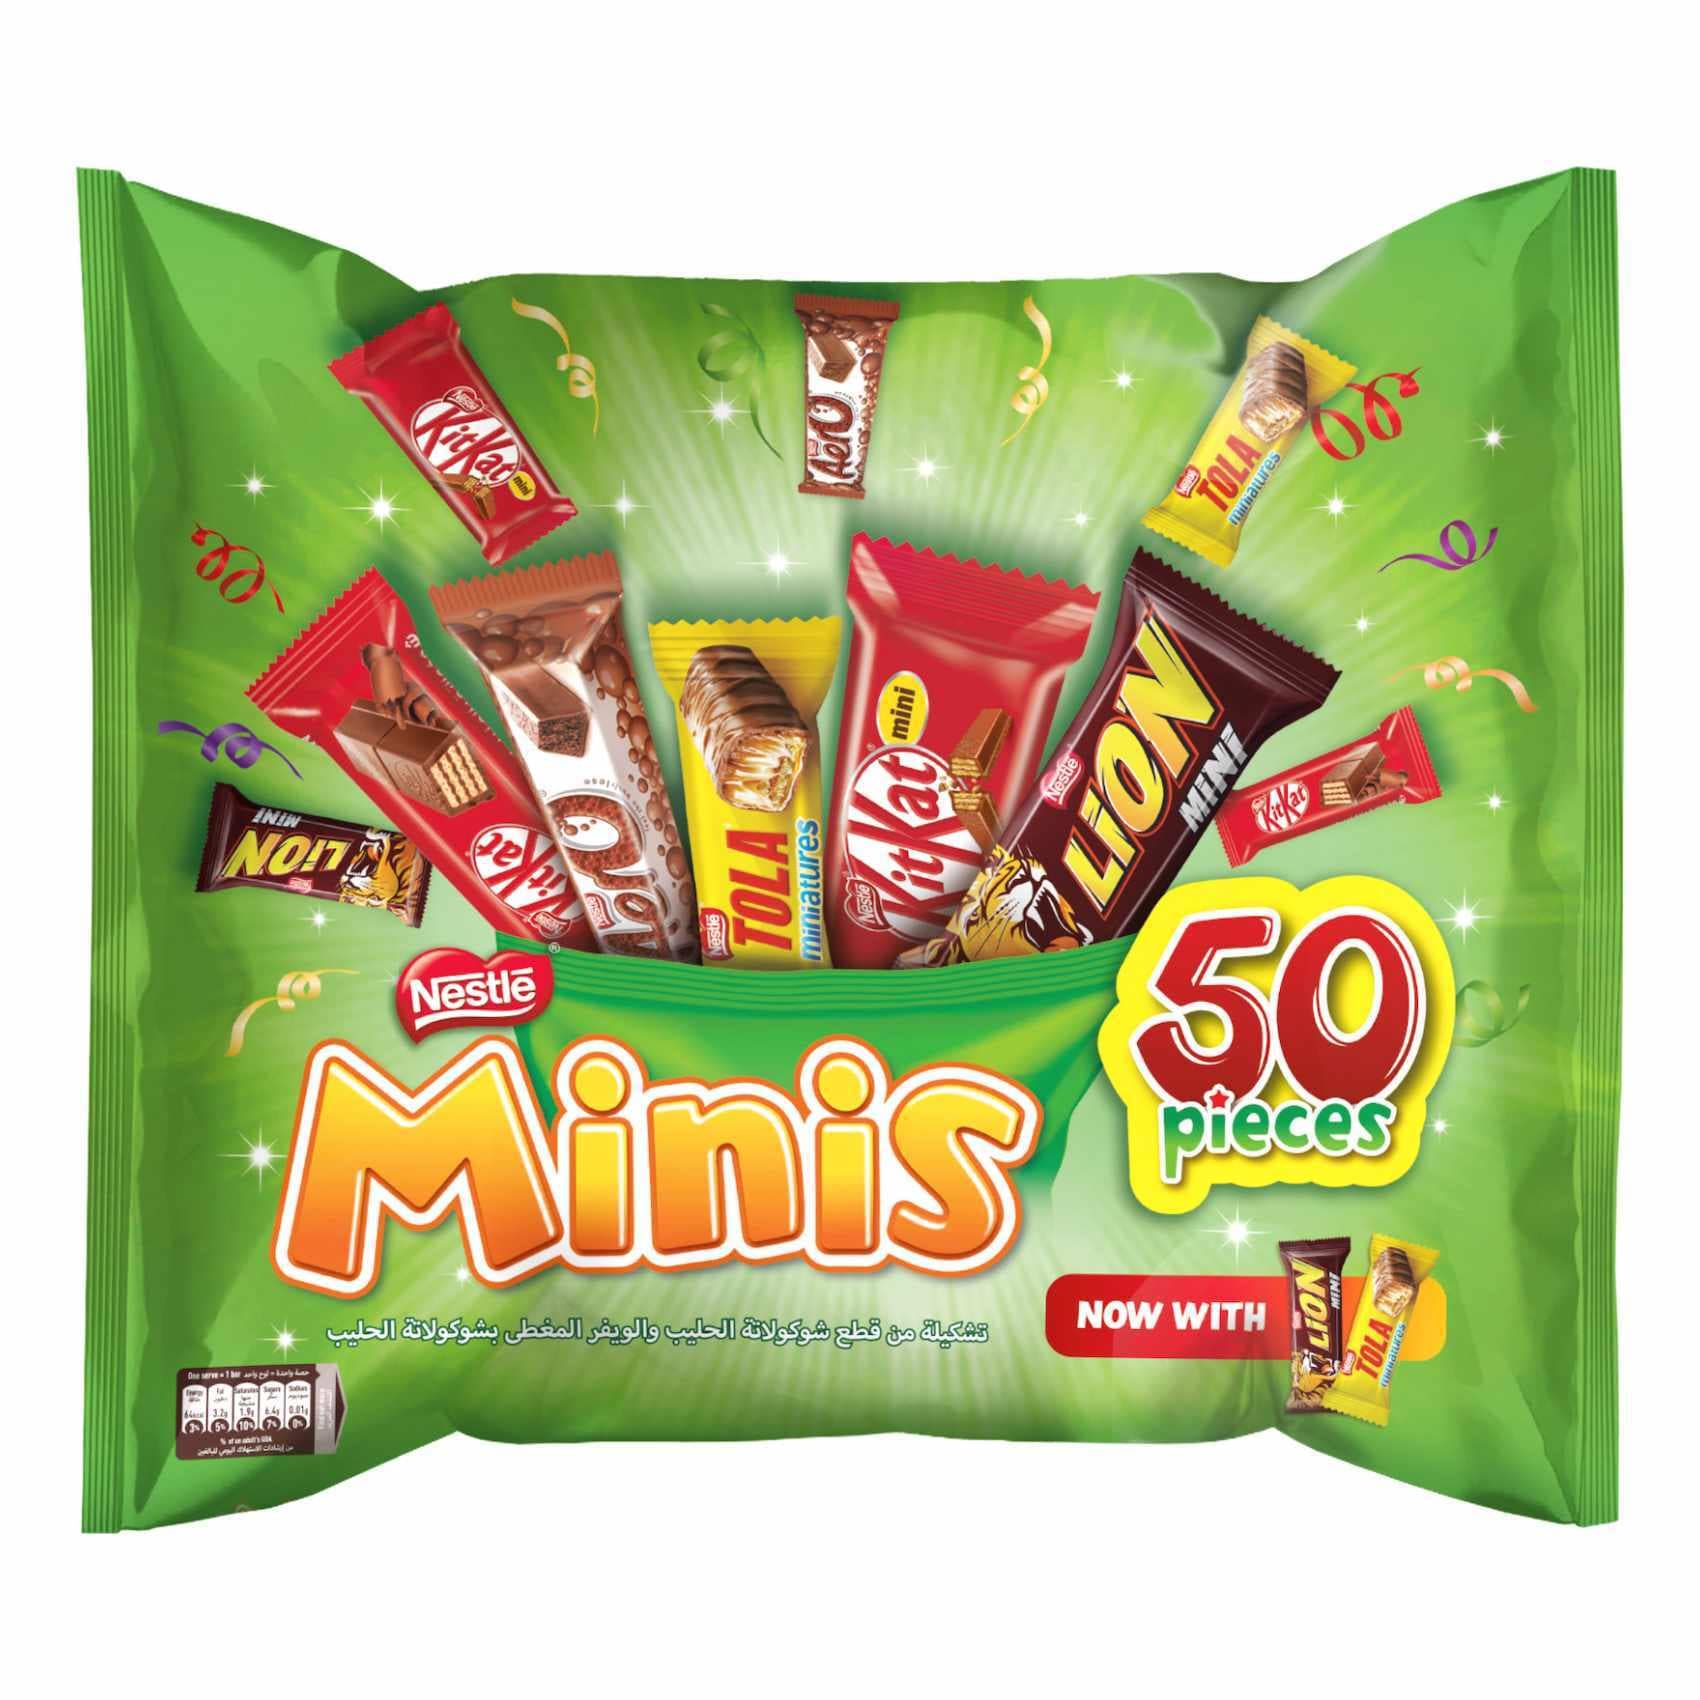 50 on Food Carrefour Buy 647g Chocolate Online - Mix Cupboard Mini Shop UAE Pieces Nestle